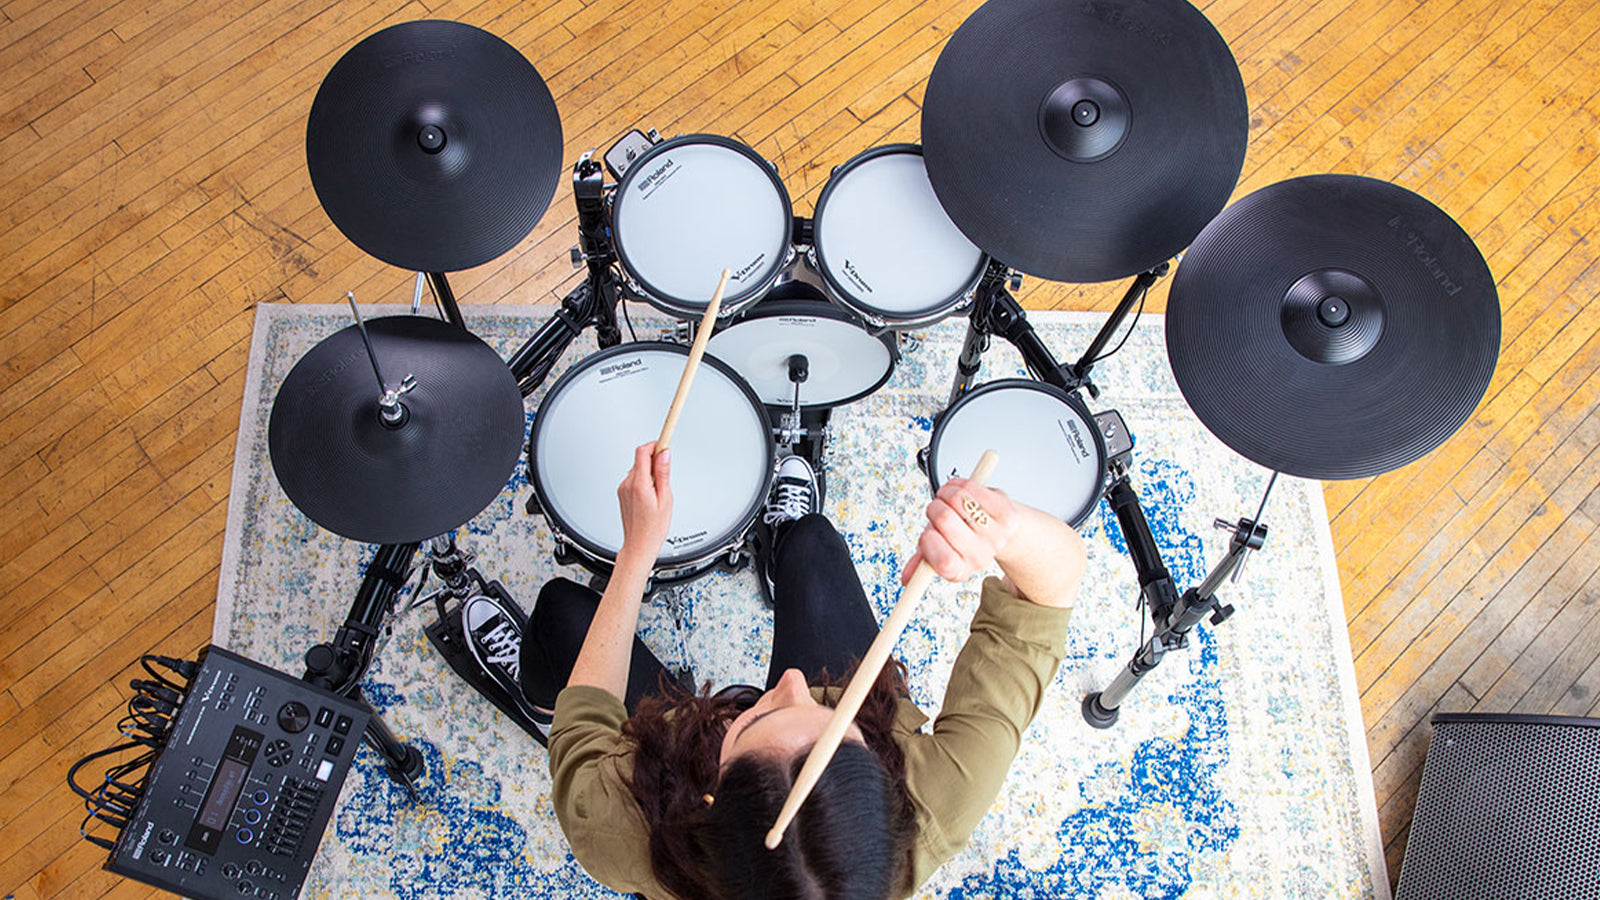 A view from above of a young lady playing a Roland TD-50K2 drum set